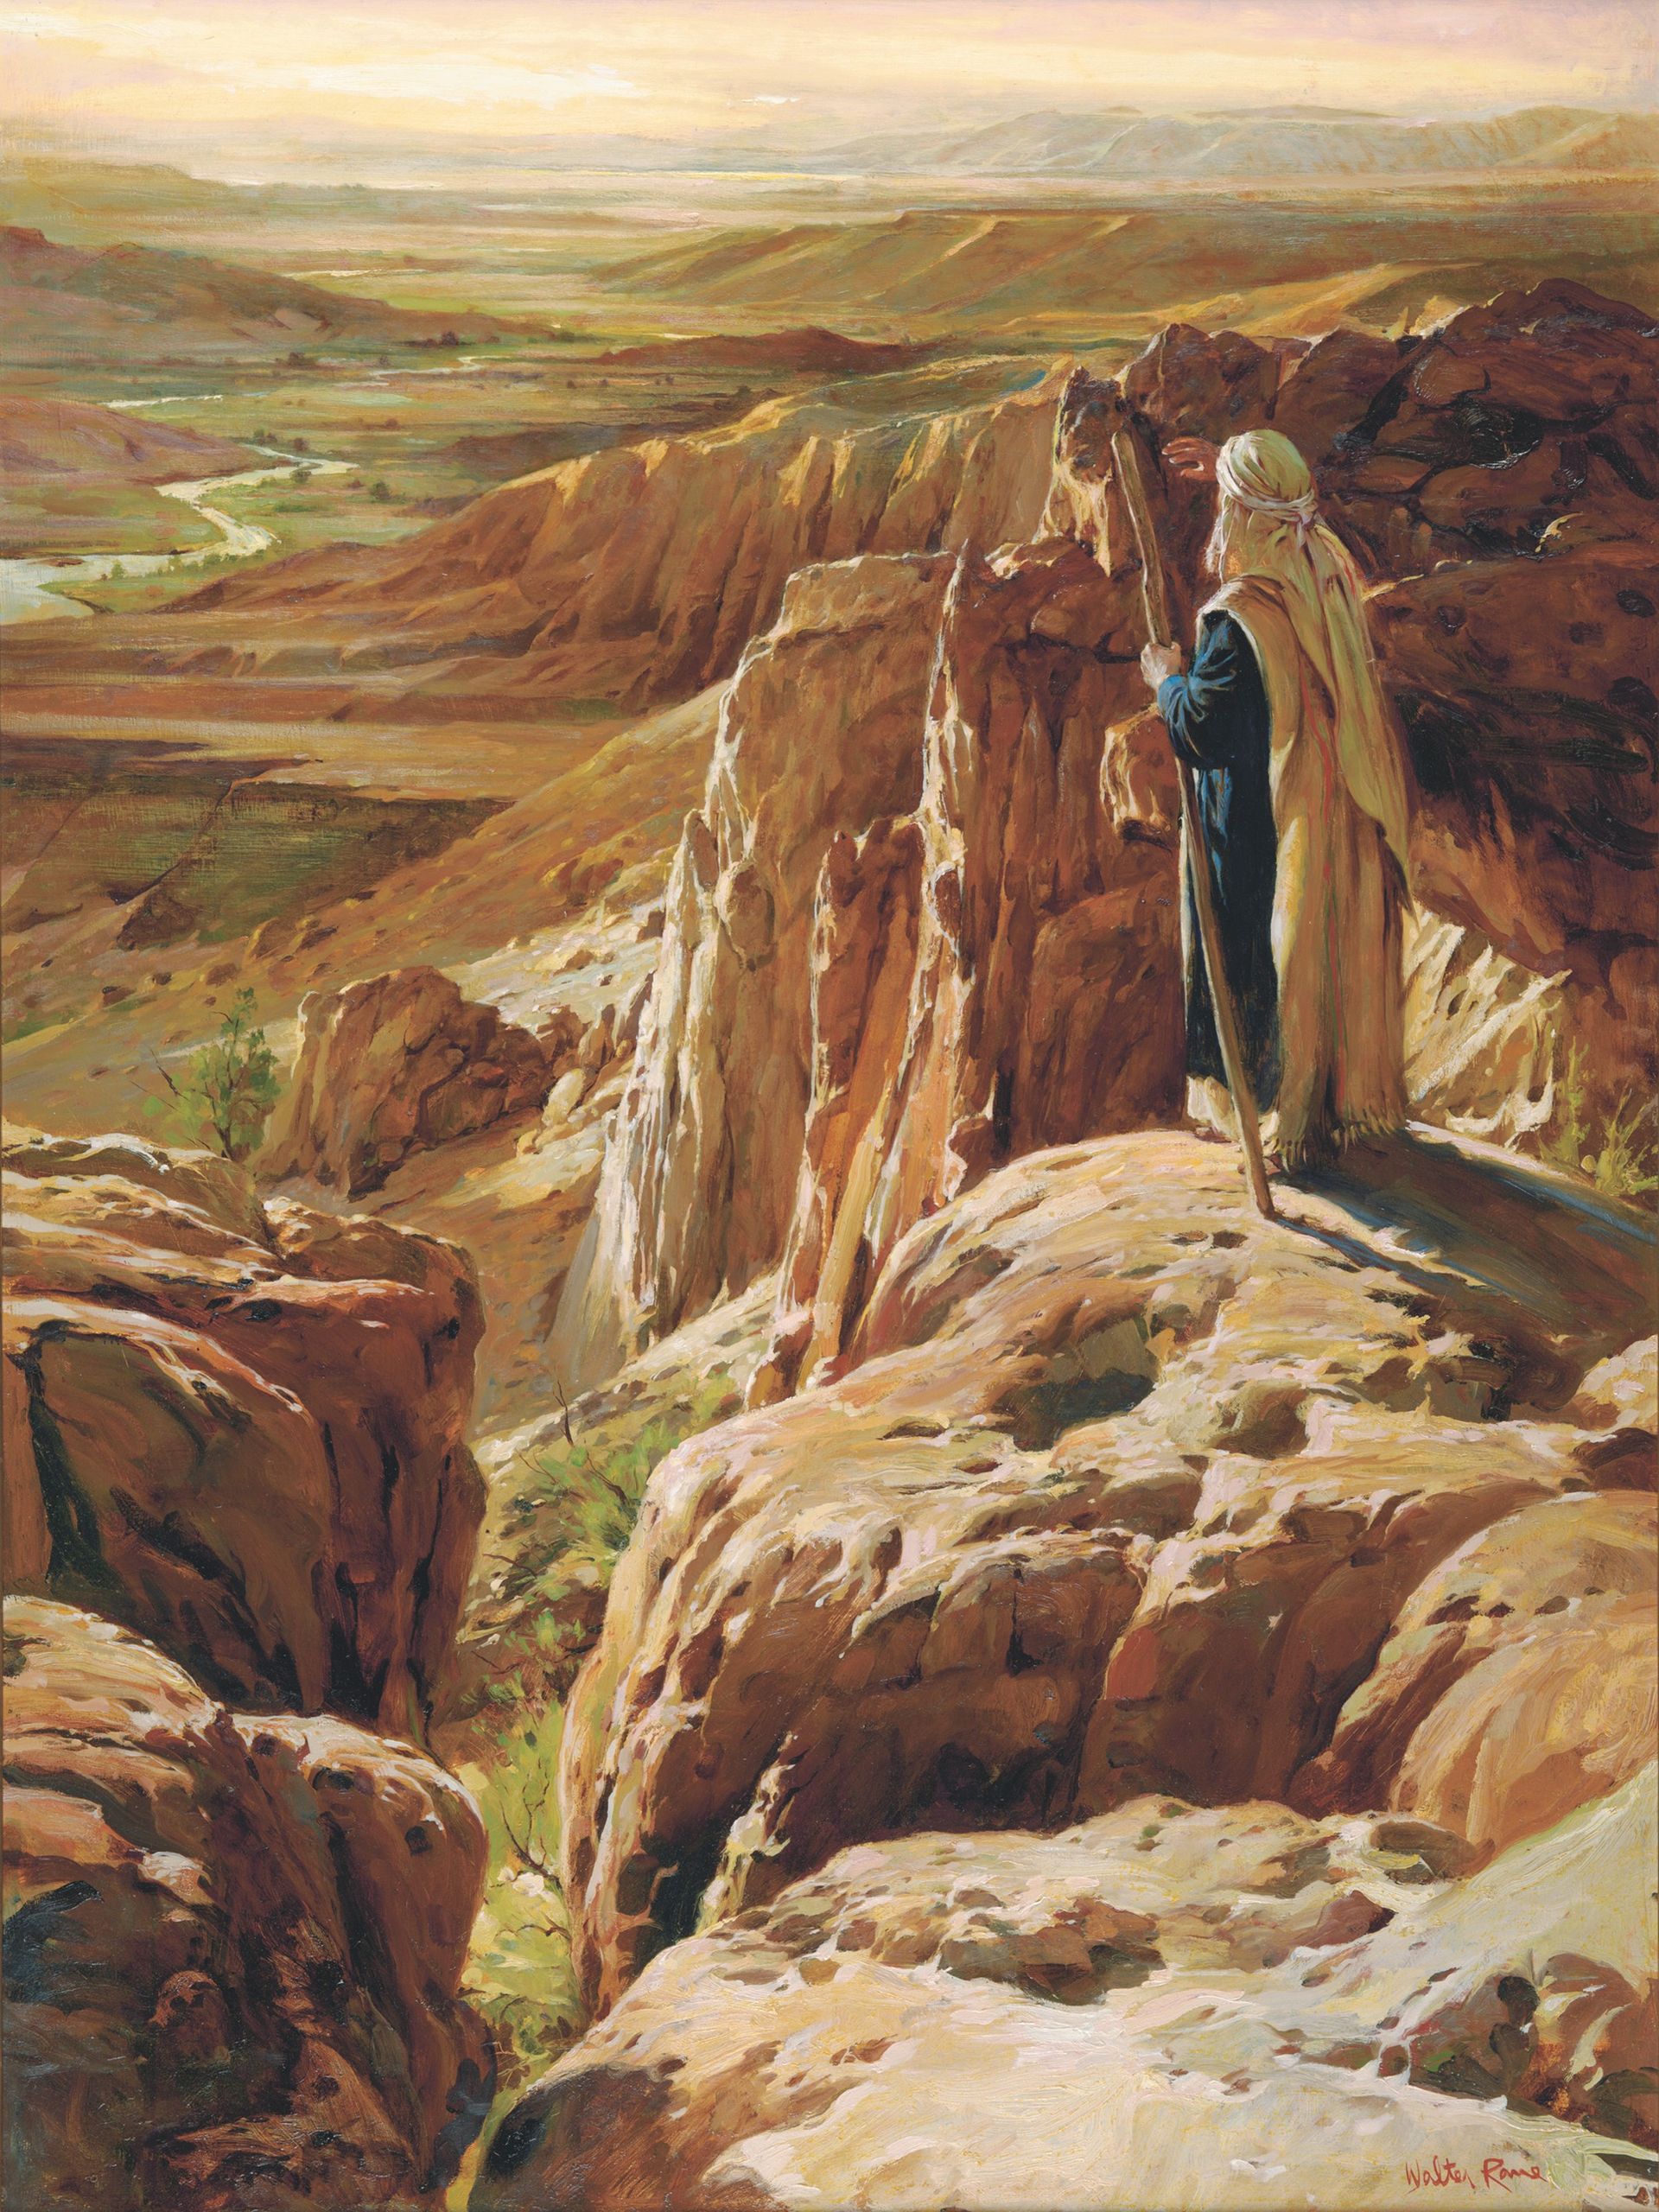 Painting of Moses overlooking the promised land from a mountaintop.